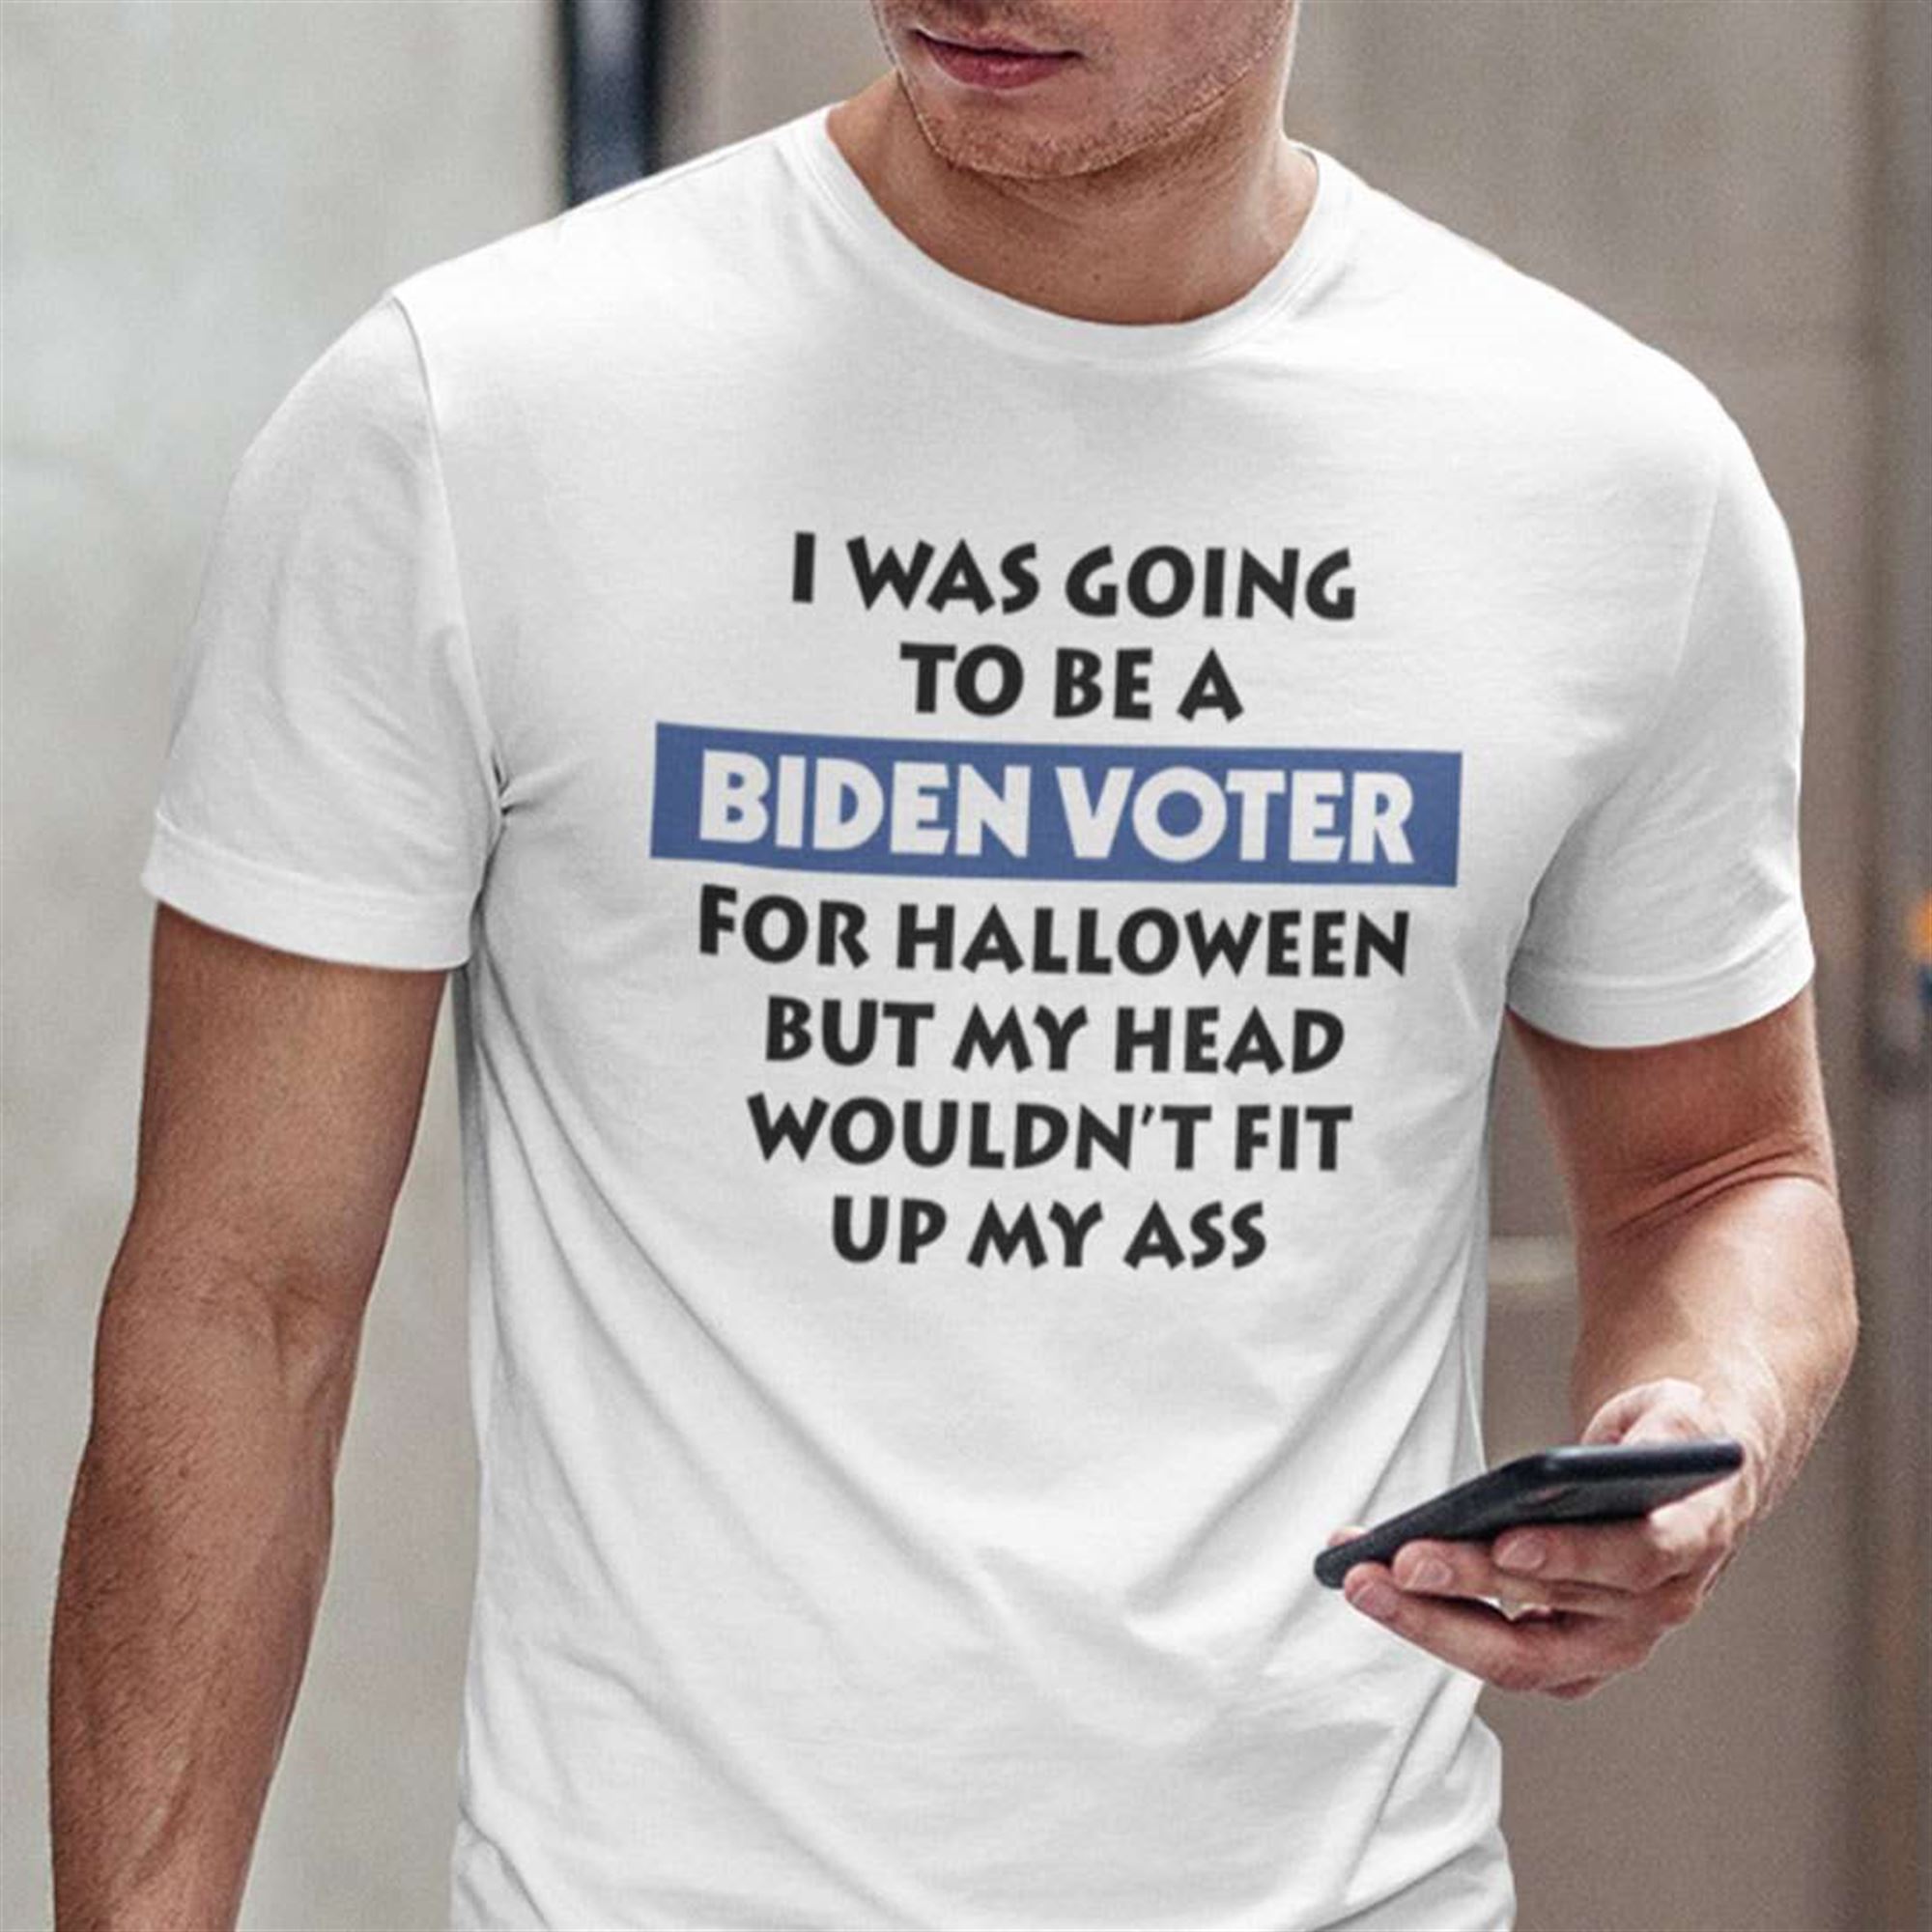 I Was Going To Be Biden Voter For Halloween T-shirt Plus Size Up To 5xl